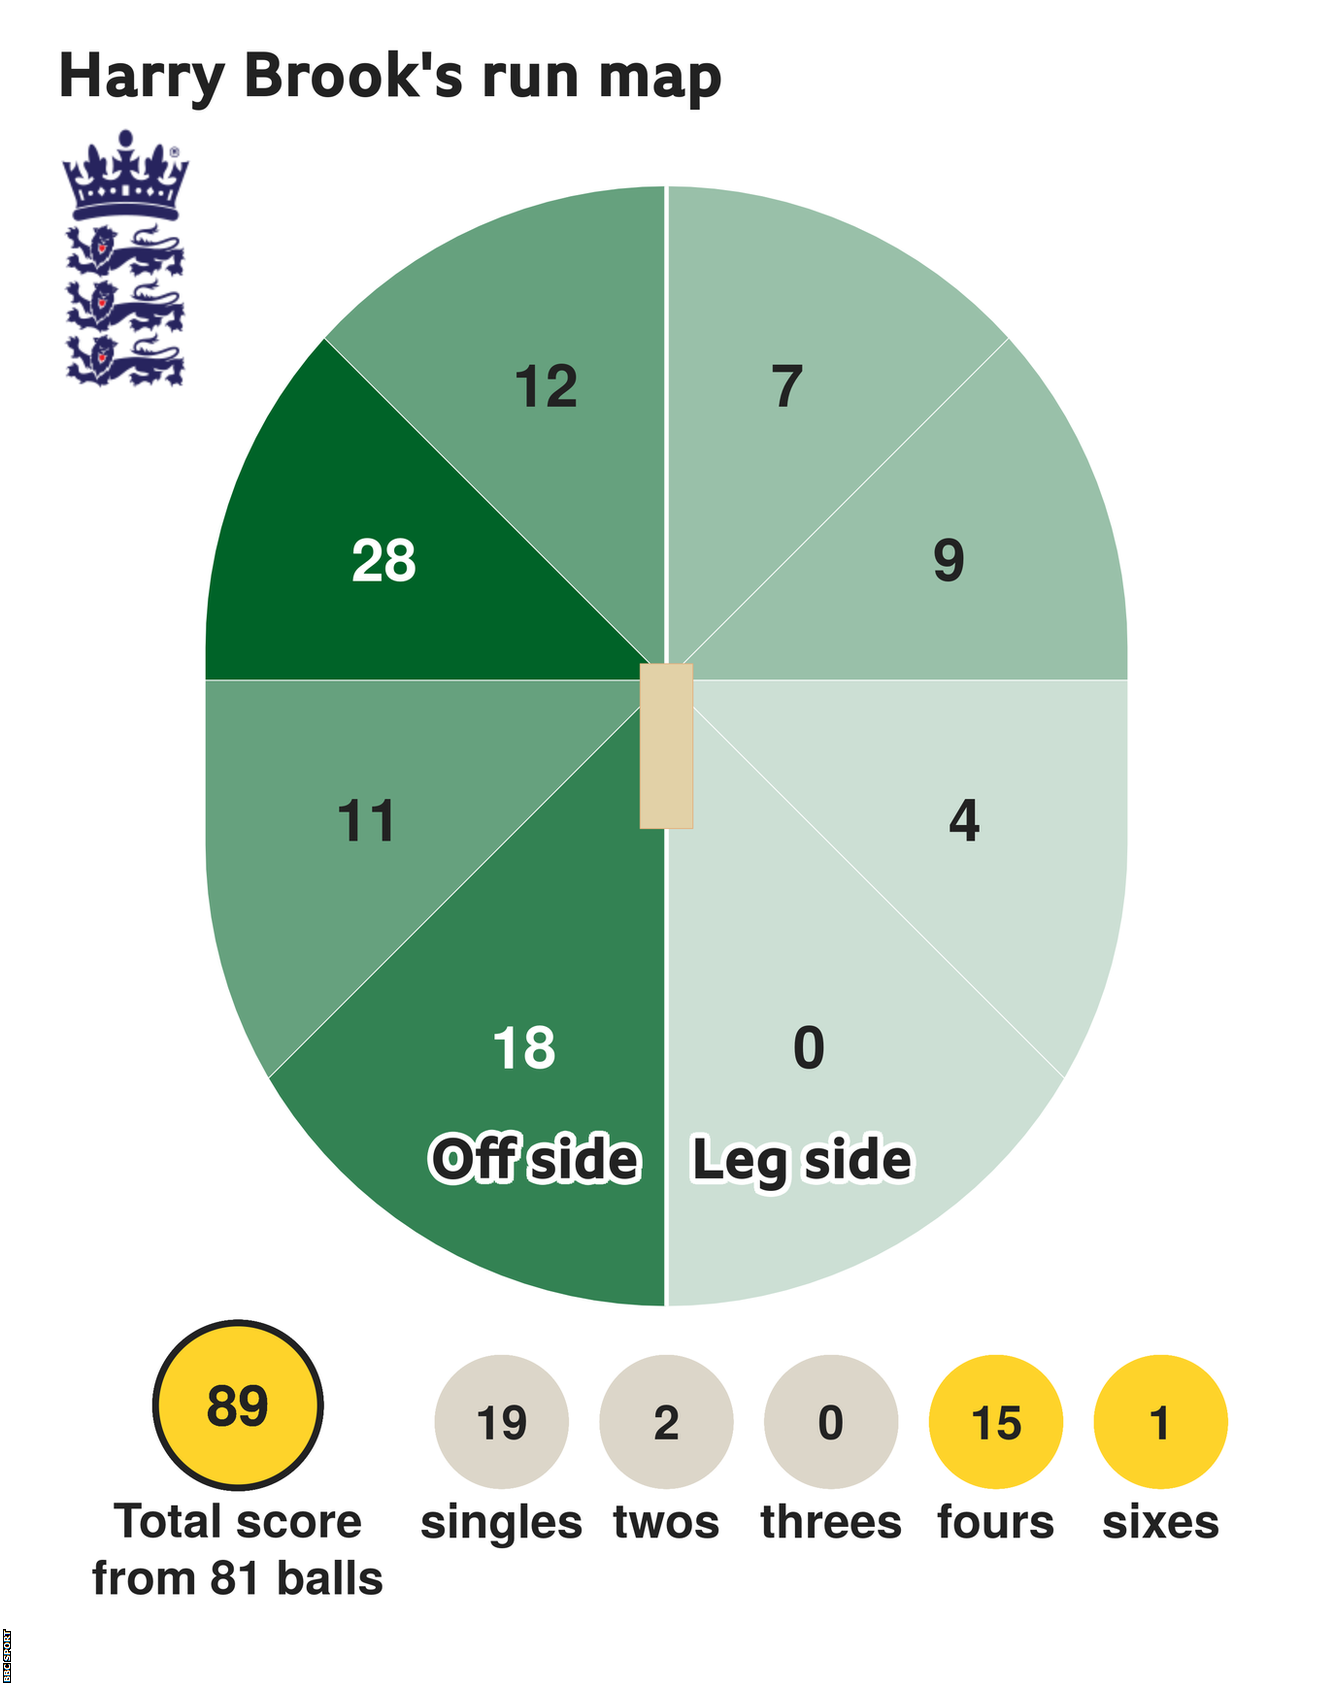 The run map shows Harry Brook scored 89 with 1 six, 15 fours, 2 twos, and 19 singles for England